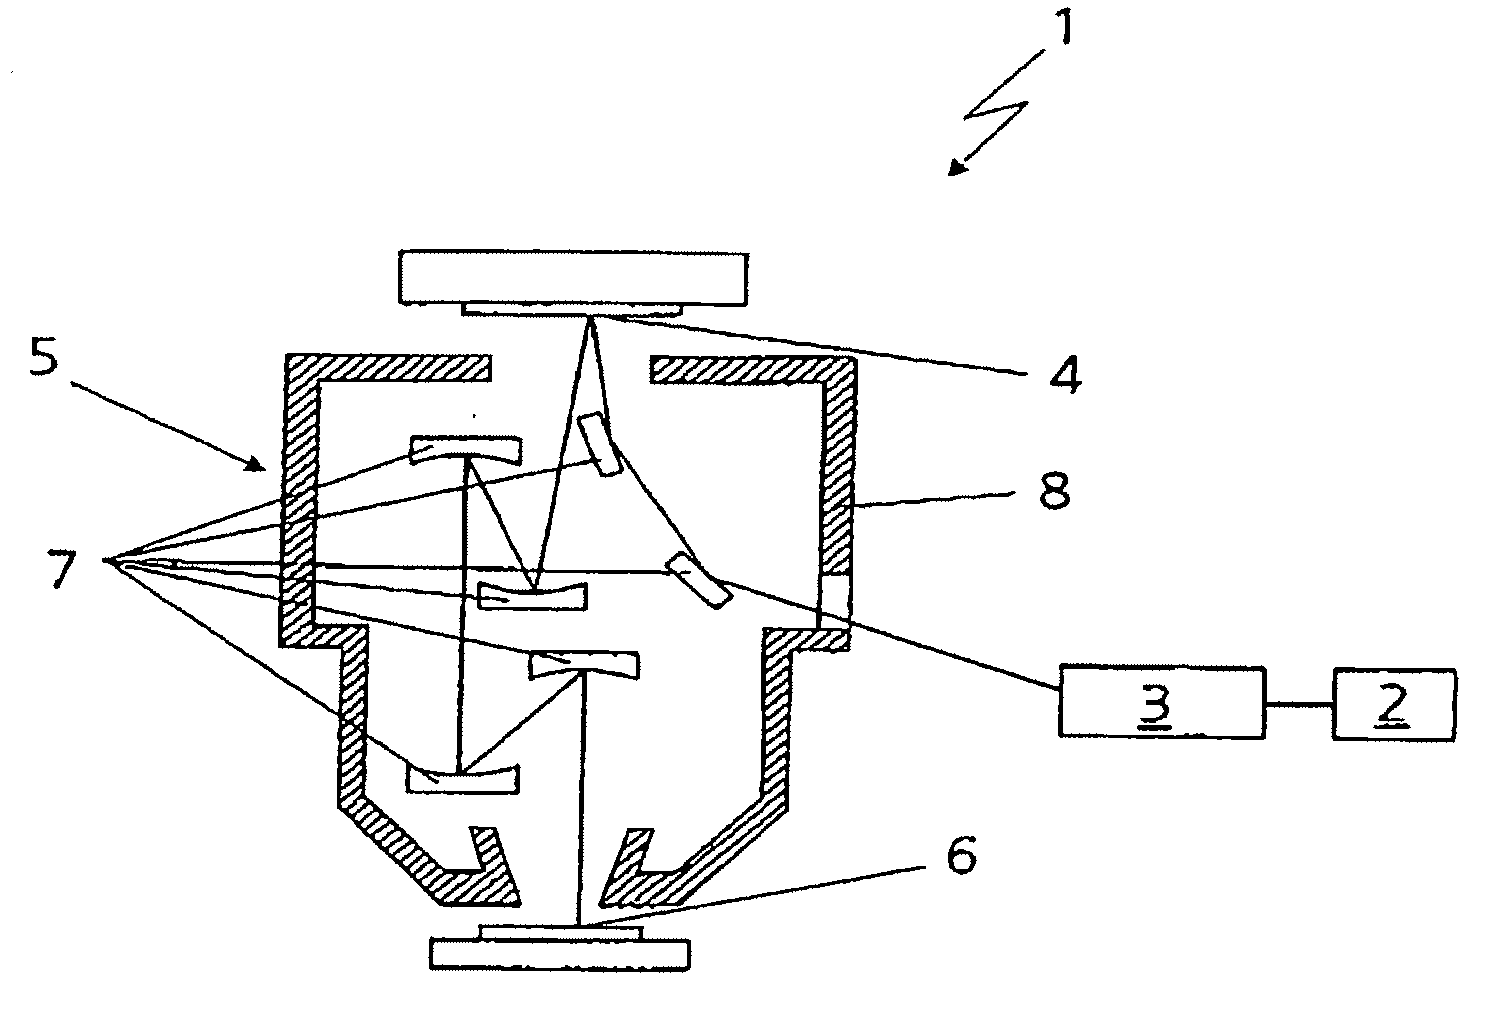 Apparatus for manipulation of an optical element